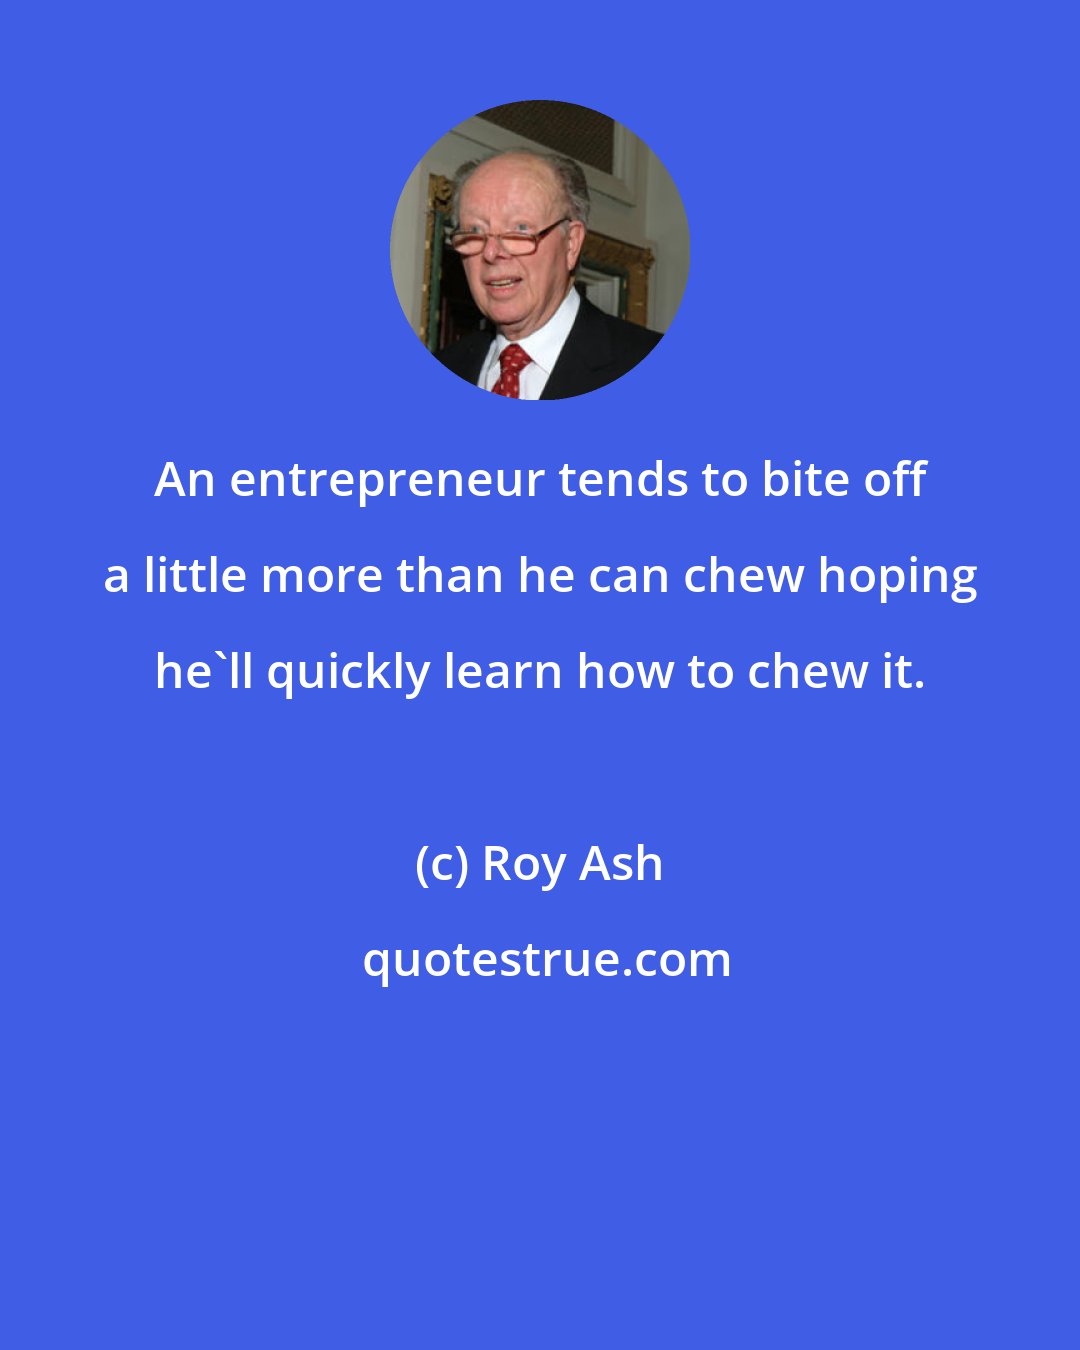 Roy Ash: An entrepreneur tends to bite off a little more than he can chew hoping he'll quickly learn how to chew it.